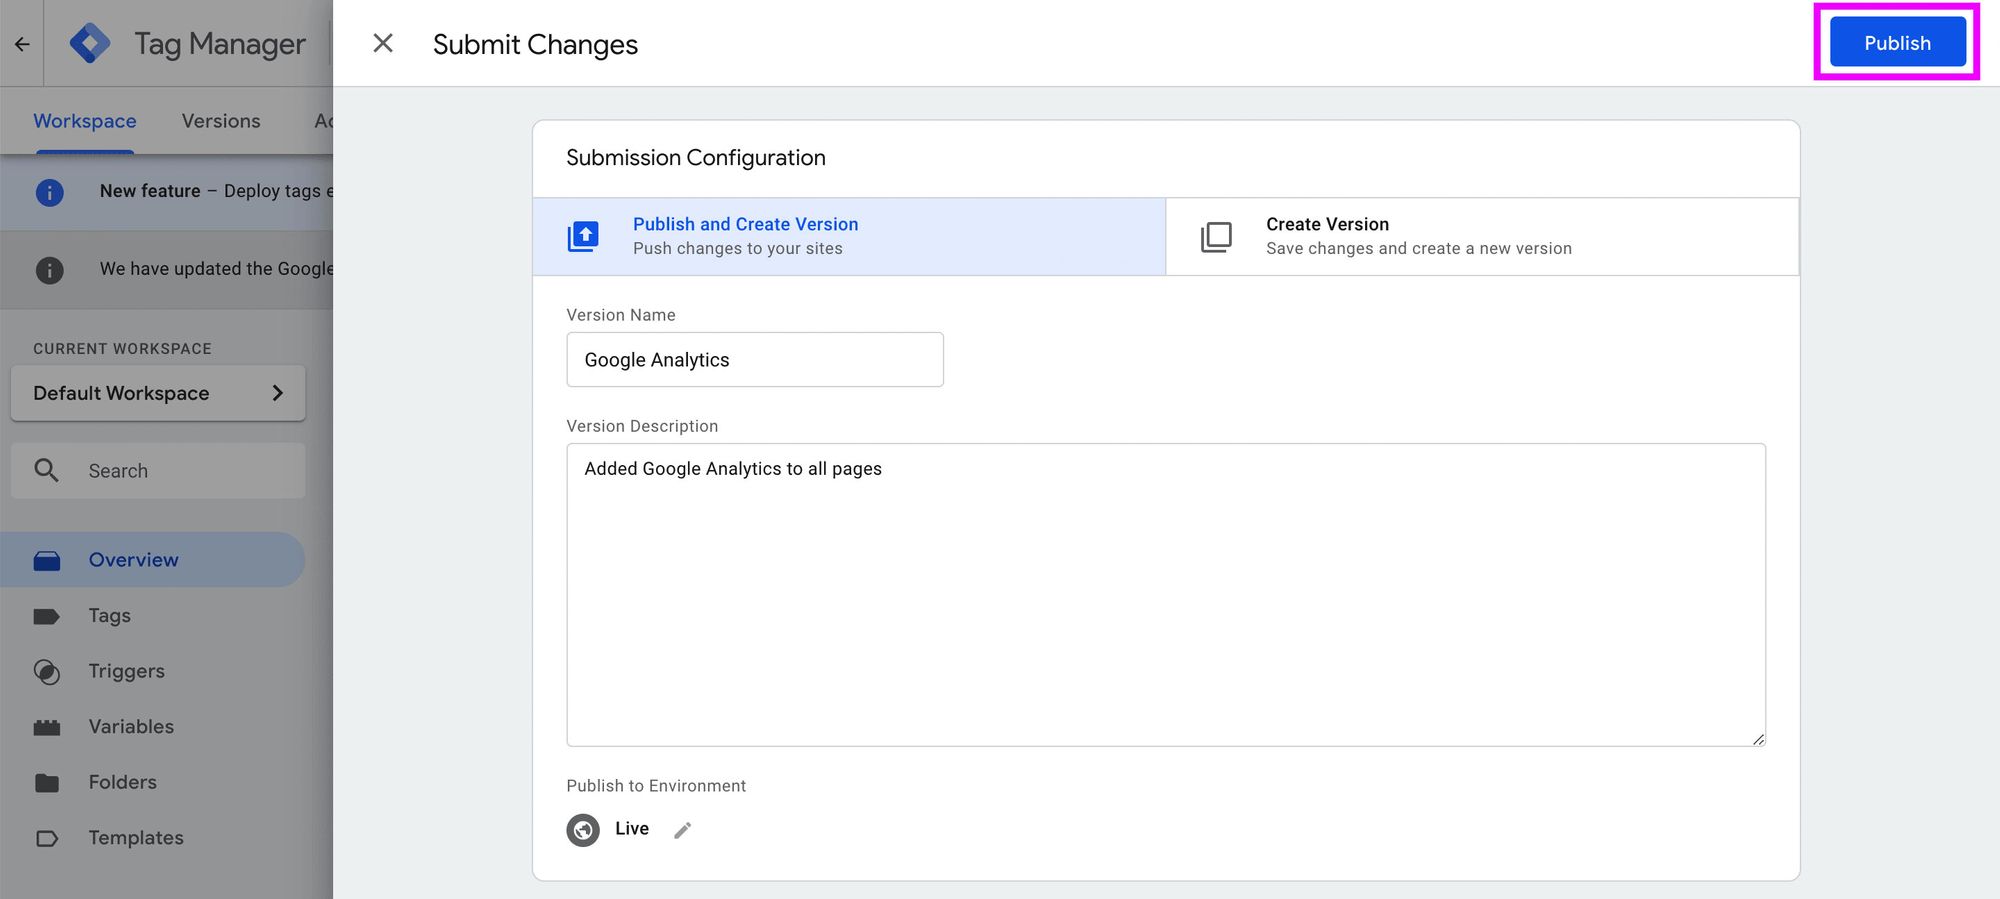 google-tag-manager-version-configuration